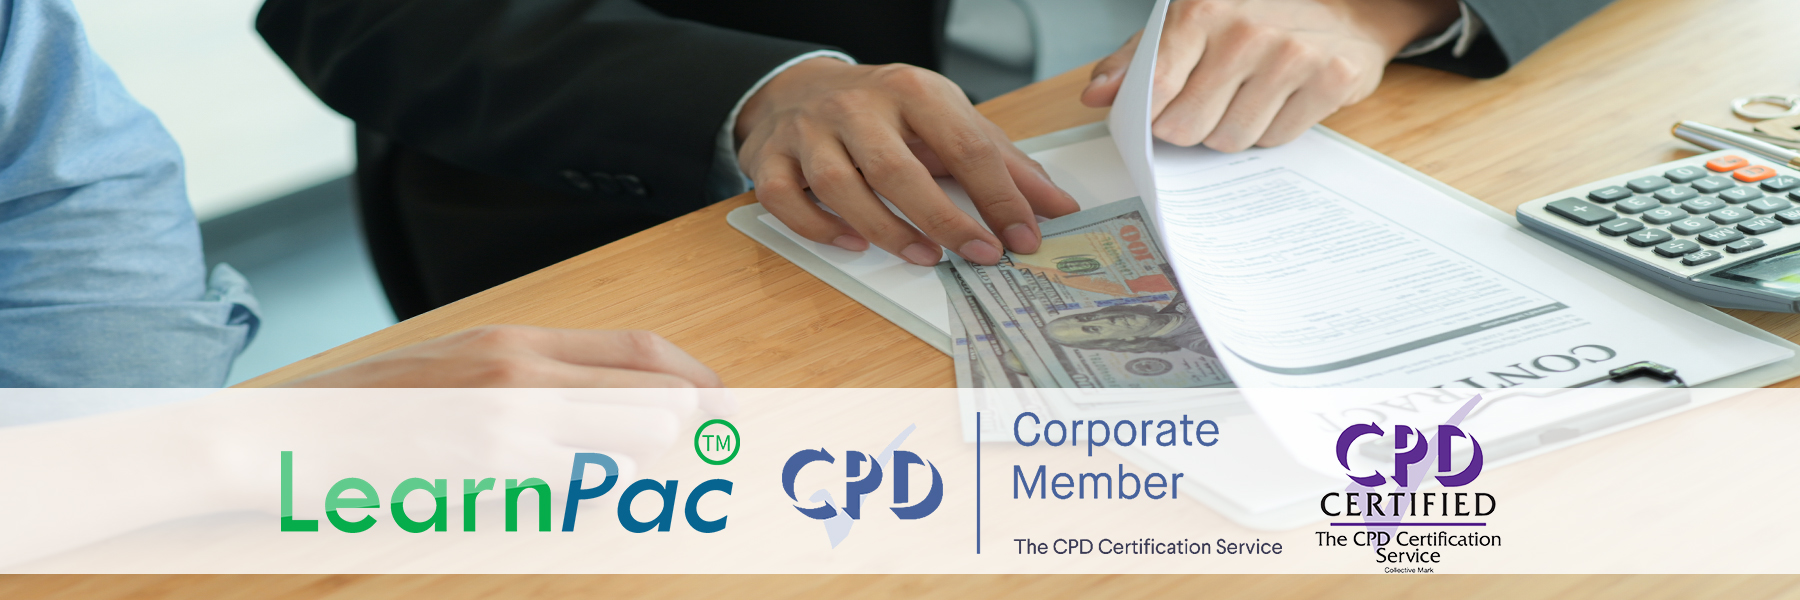 Counter Fraud Training - E-Learning Courses - LearnPac Systems UK -